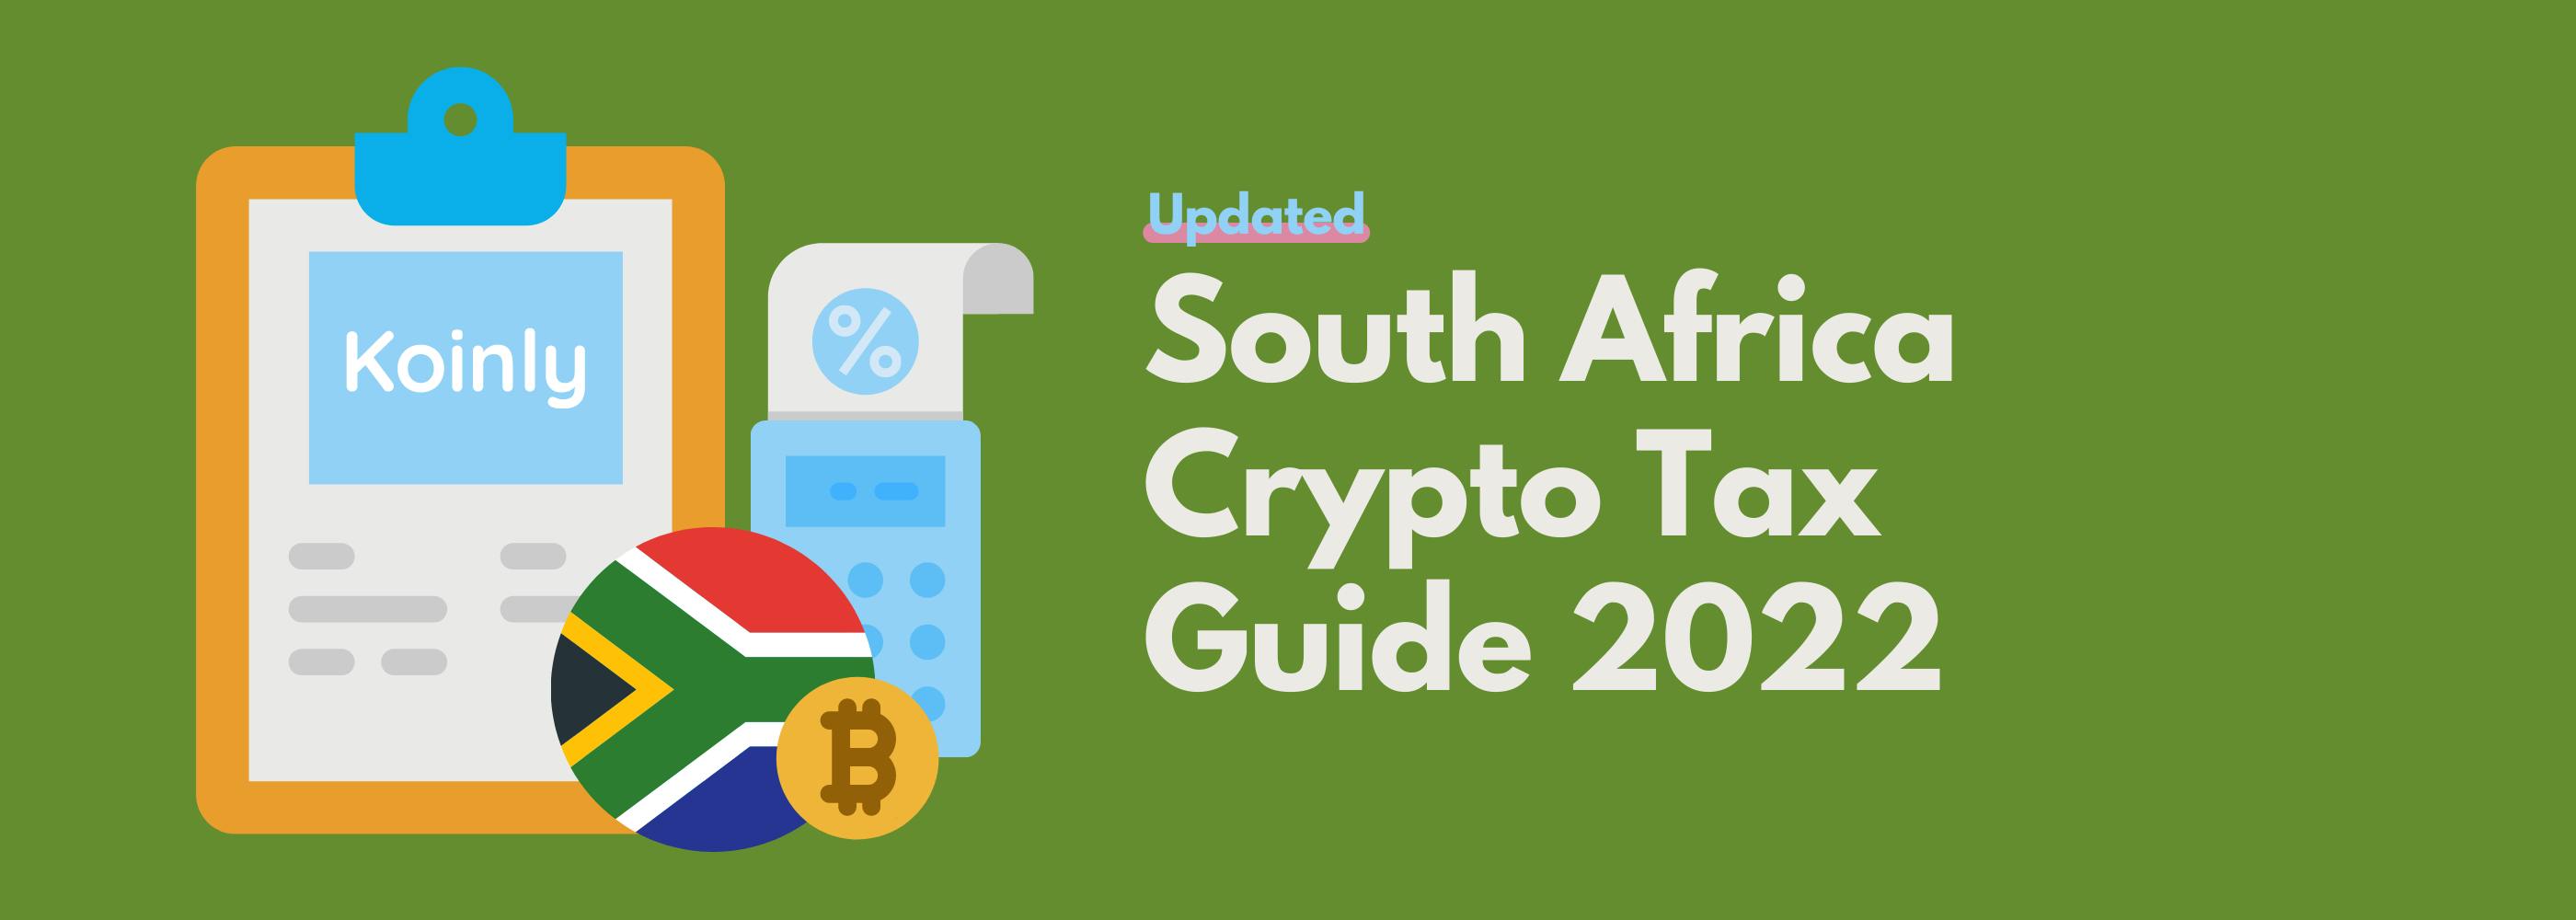 South Africa Crypto Tax Guide